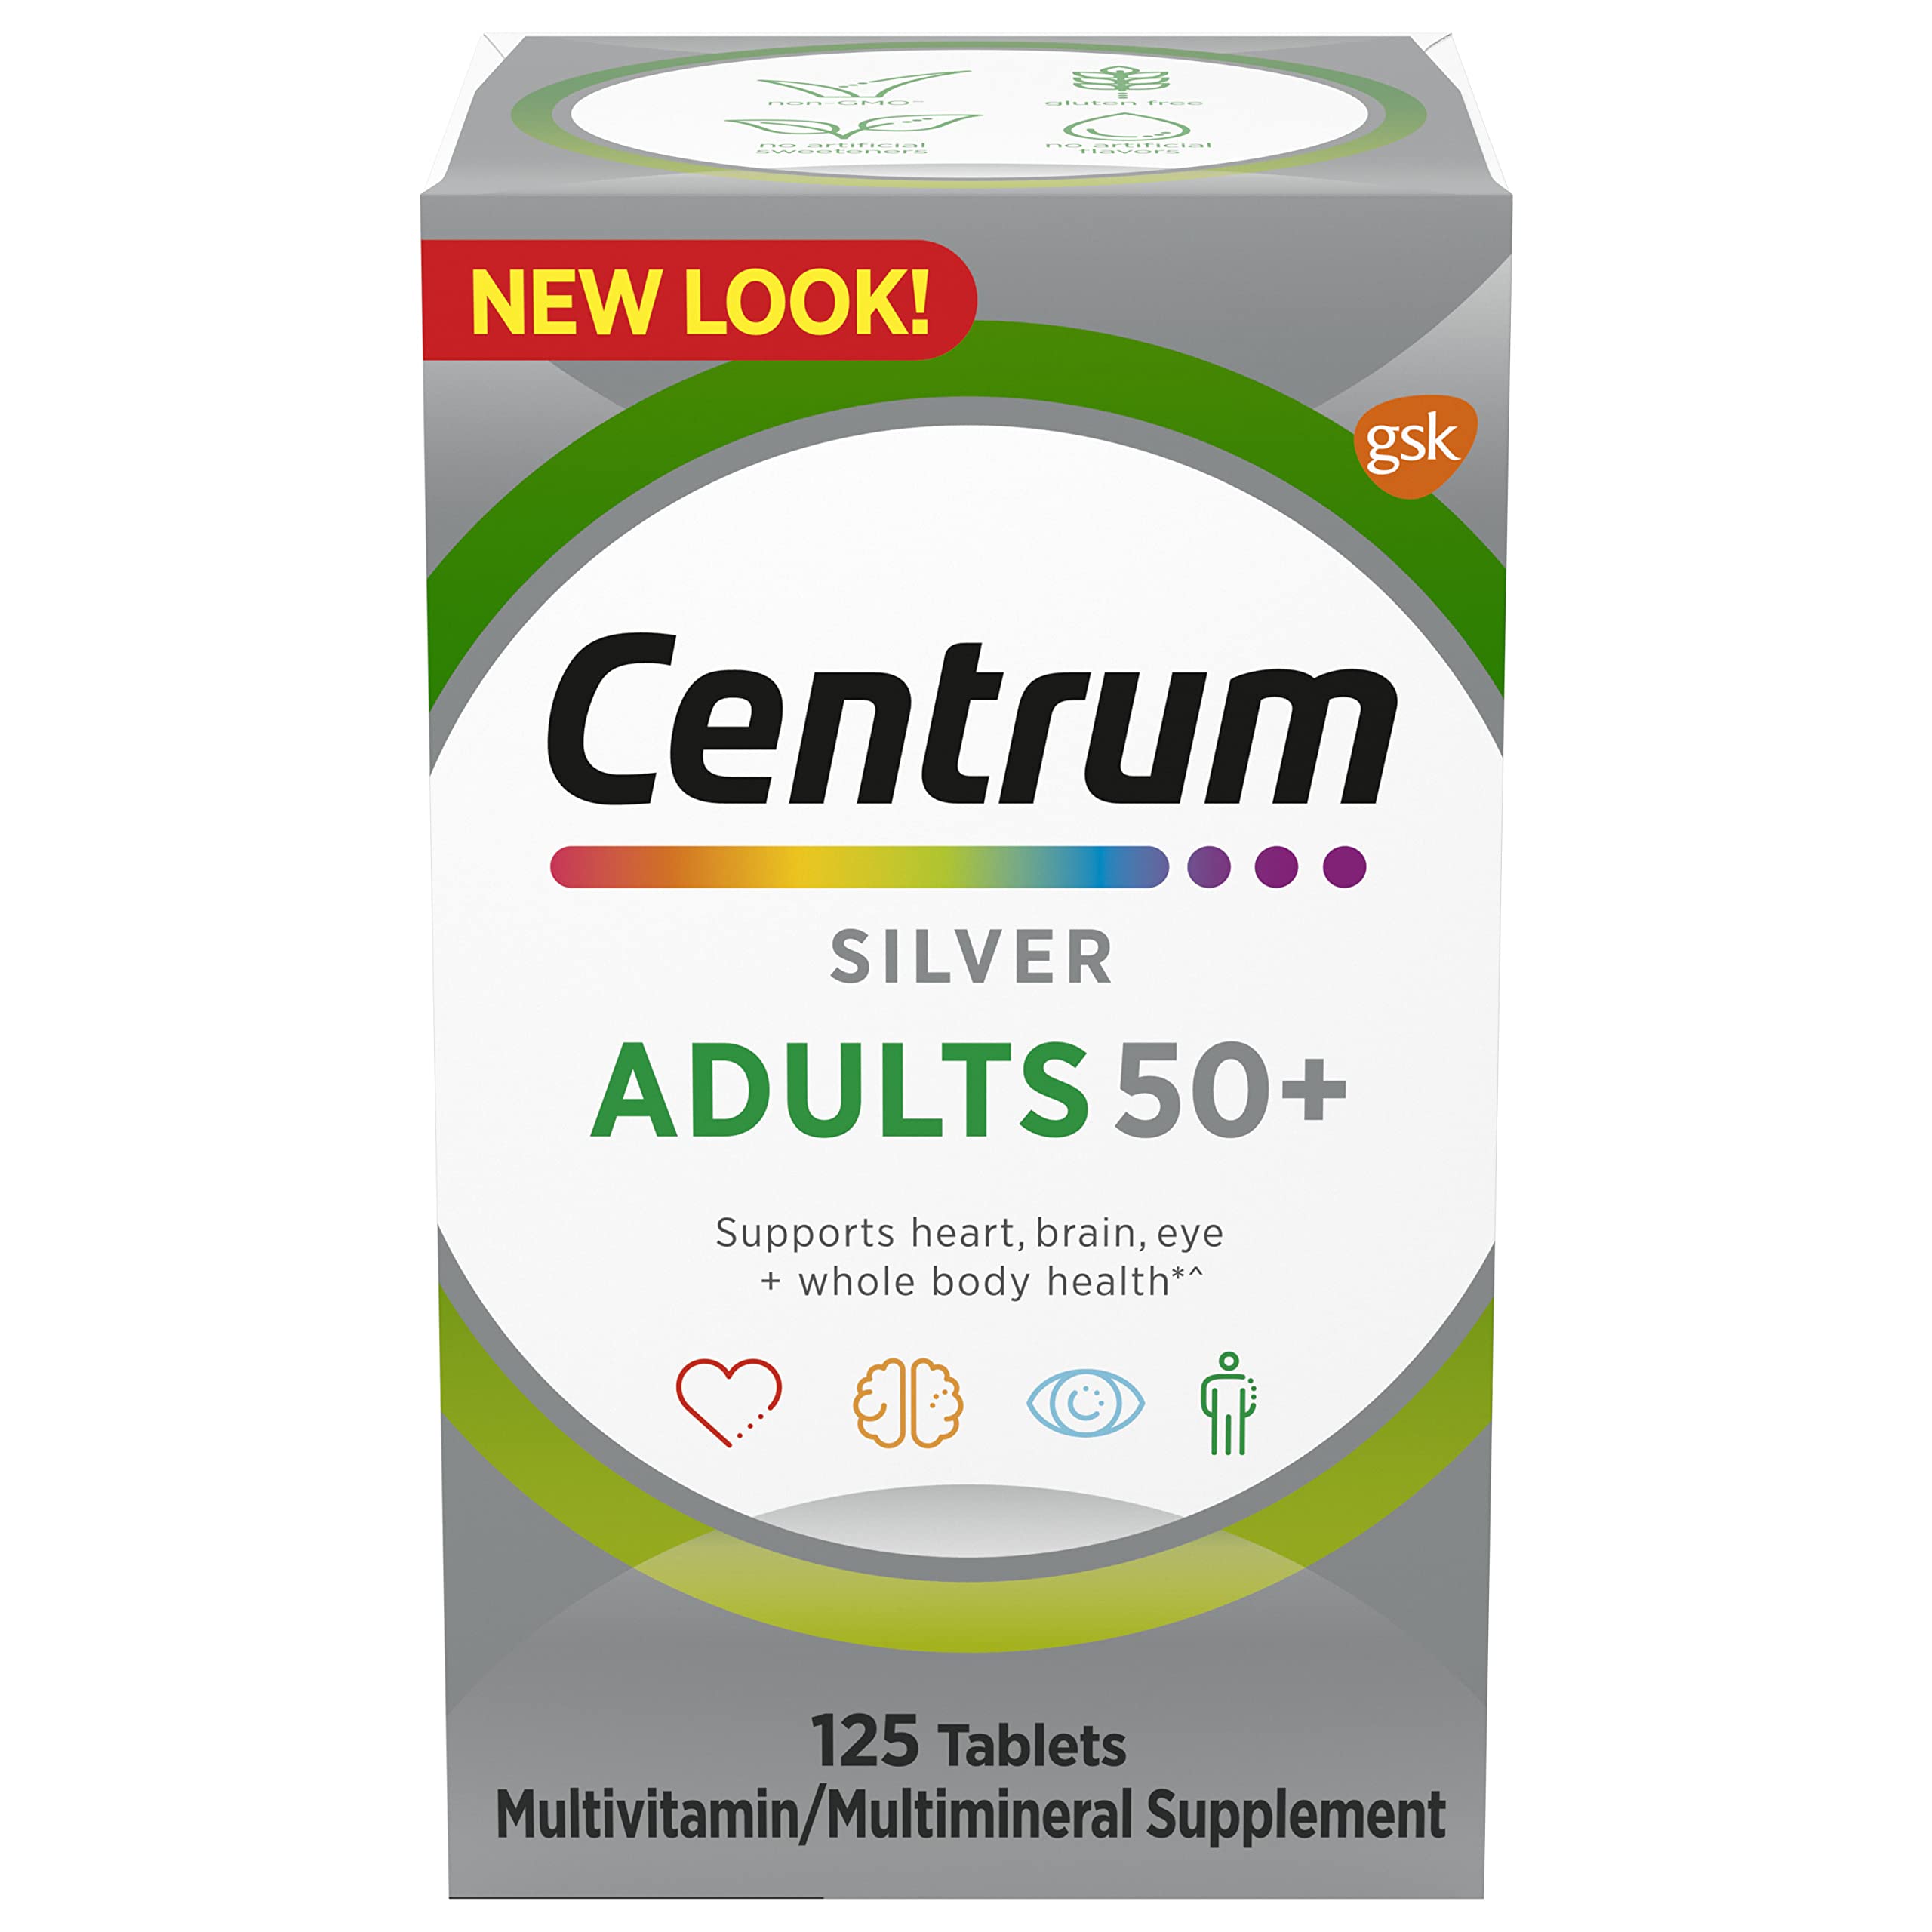 Centrum Silver Multivitamin for Adults 50 Plus,125 count New 125 Count, only $9.95